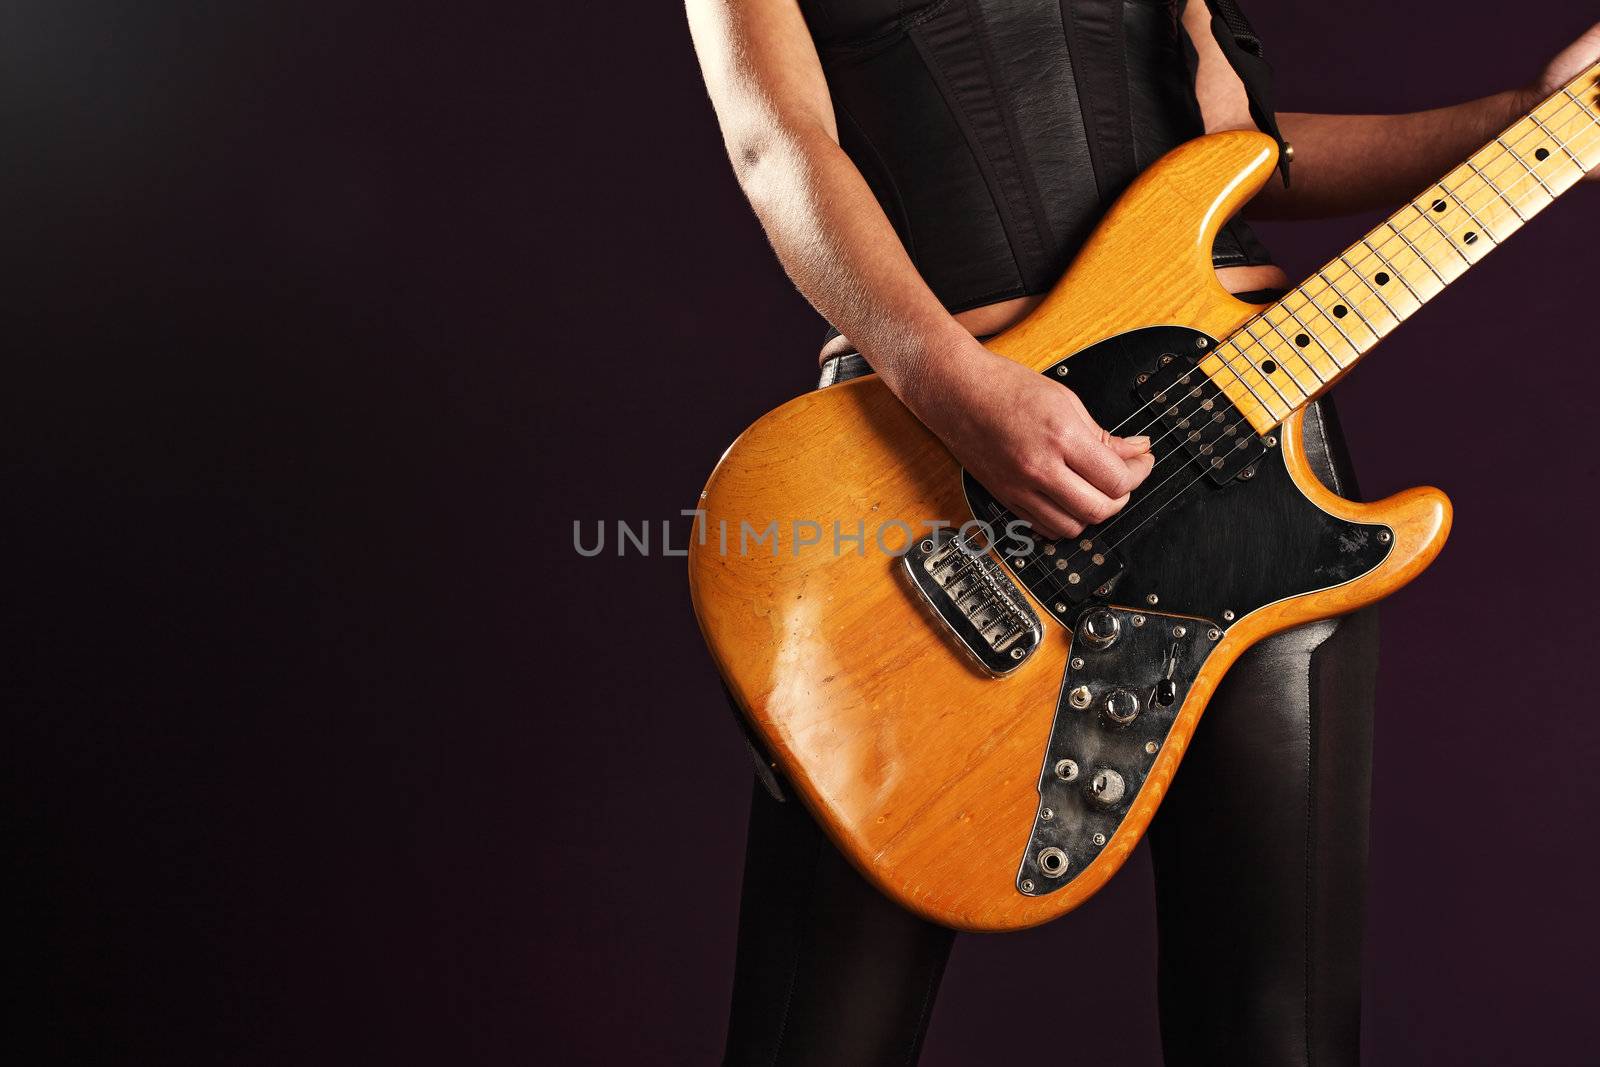 Photo of the body of a female guitar player standing and playing over a dark background.